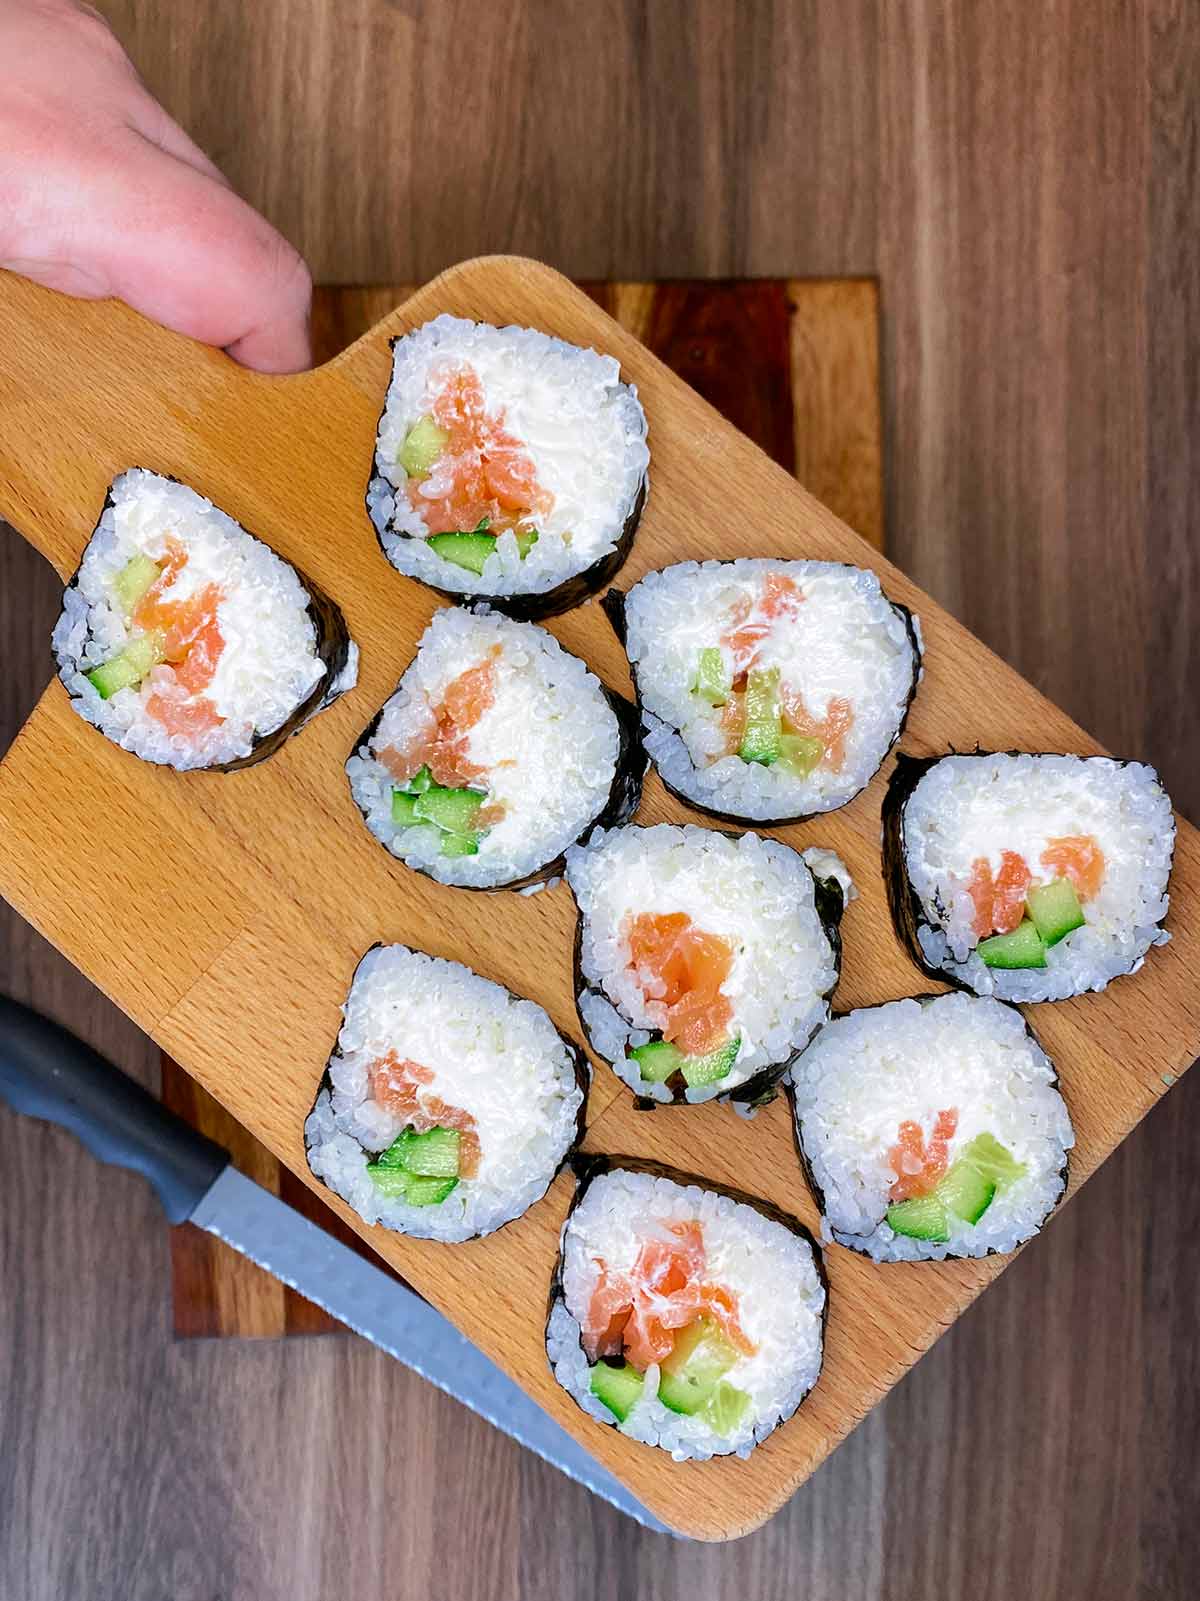 Rolled sushi cut into nine pieces.